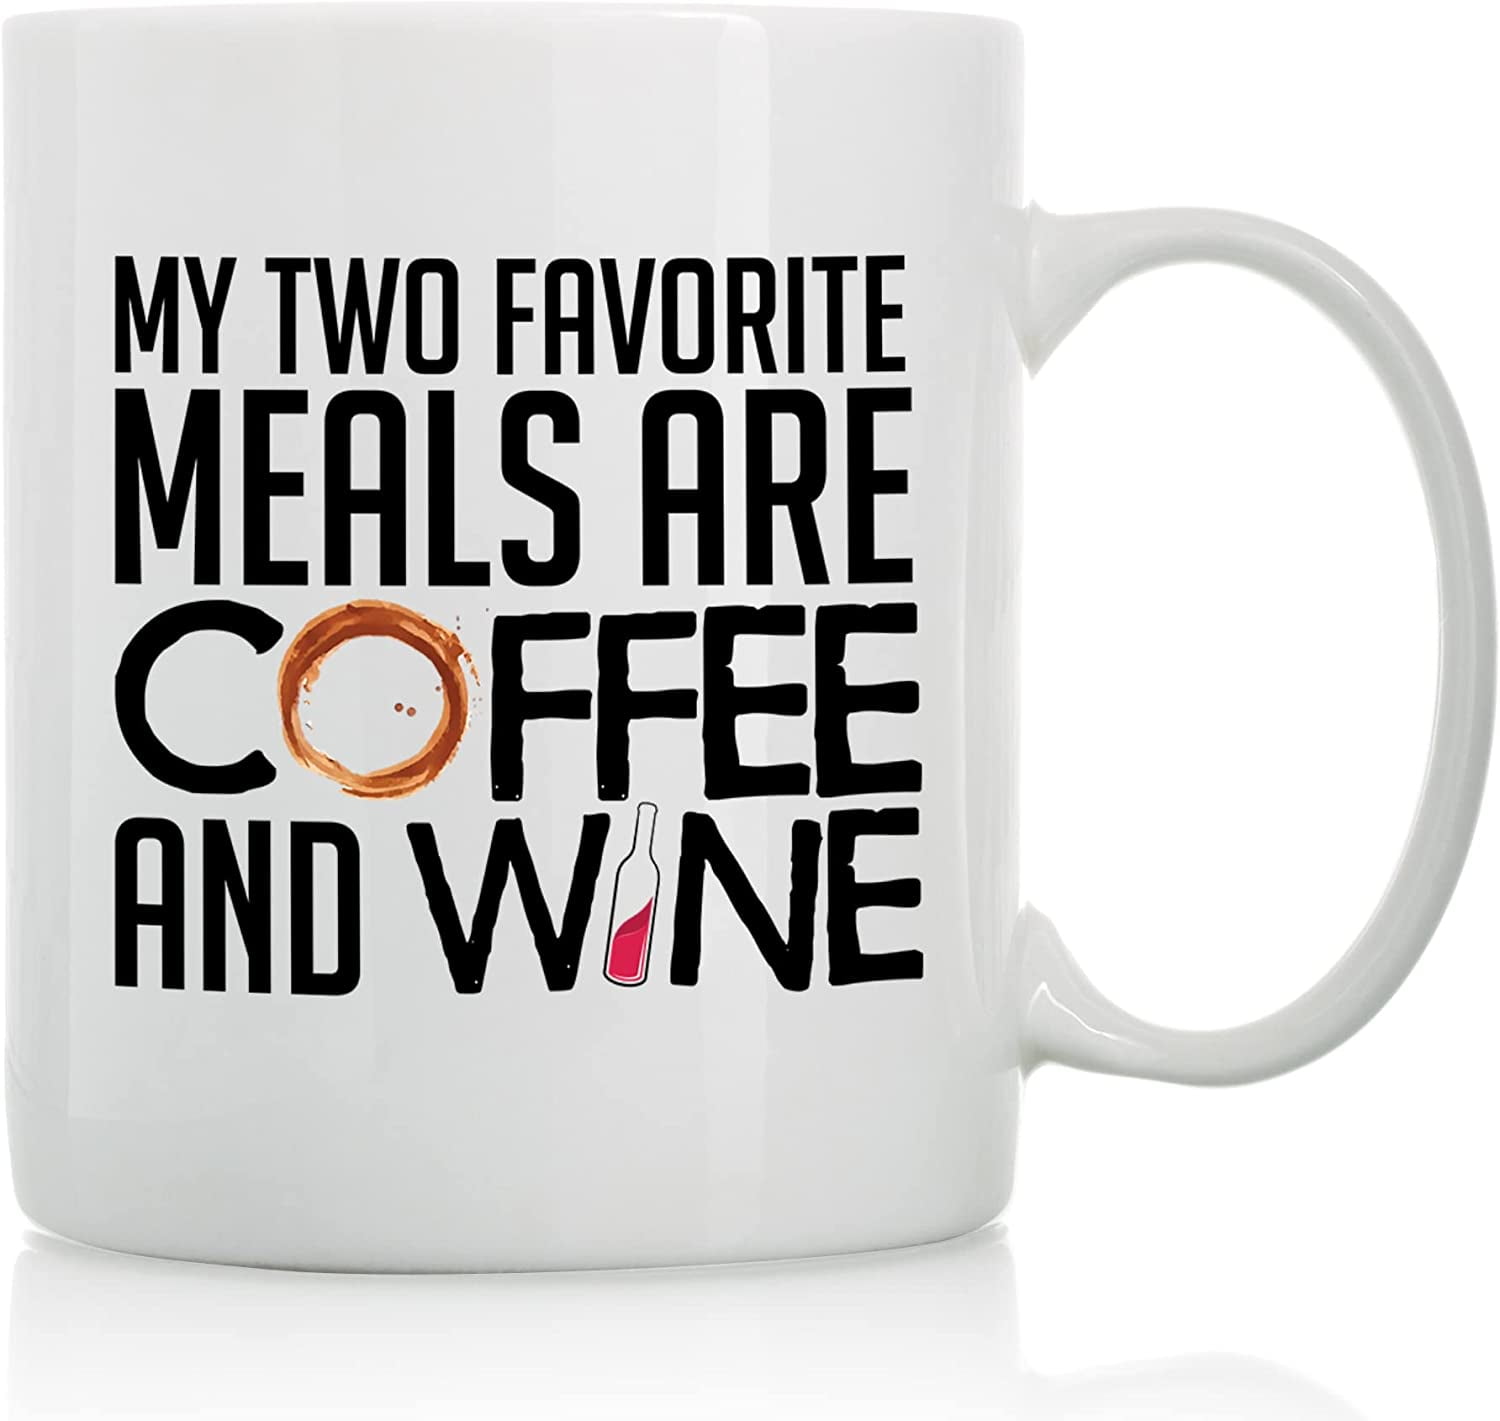 Coffee Benefits Mug - 11oz and 15oz Funny Coffee Mugs - The Best Funny Gift  for Friends and Colleagues - Coffee Mugs and Cups with Sayings by